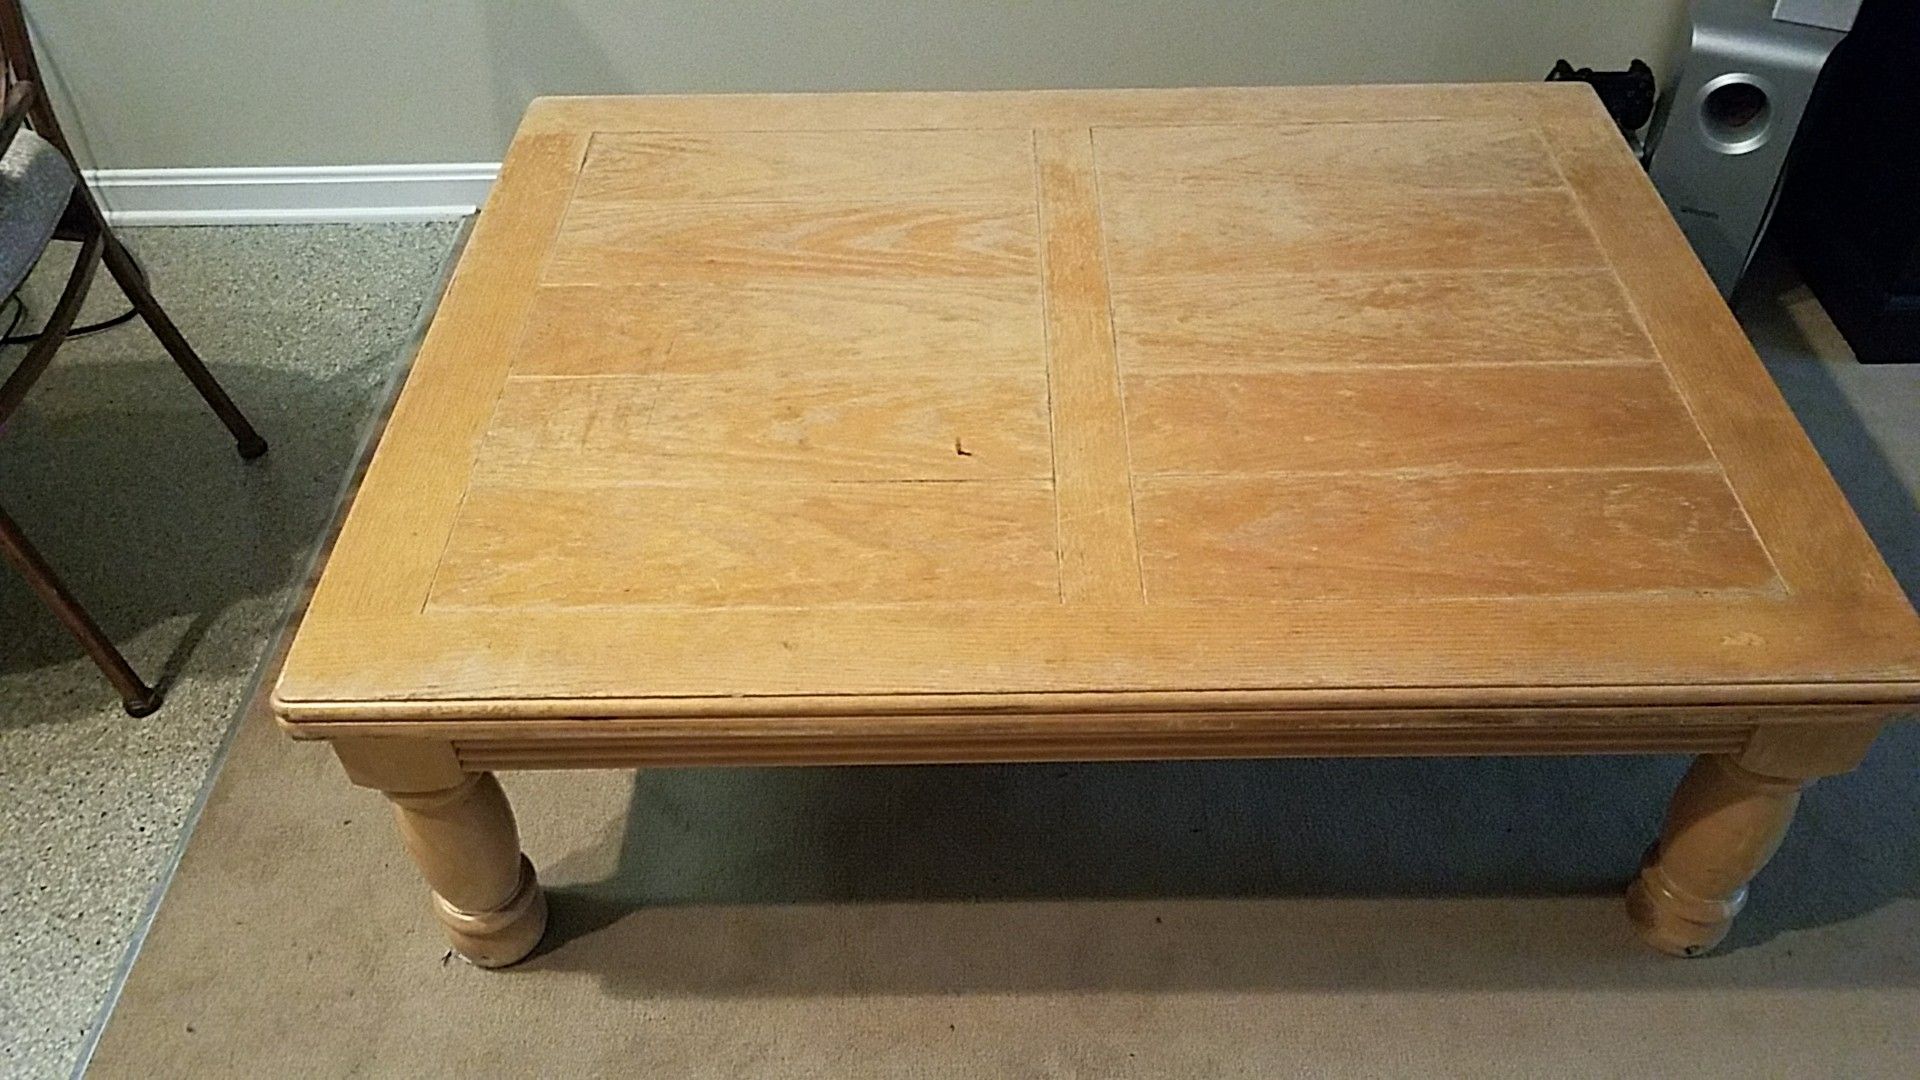 Great condition solid wood table